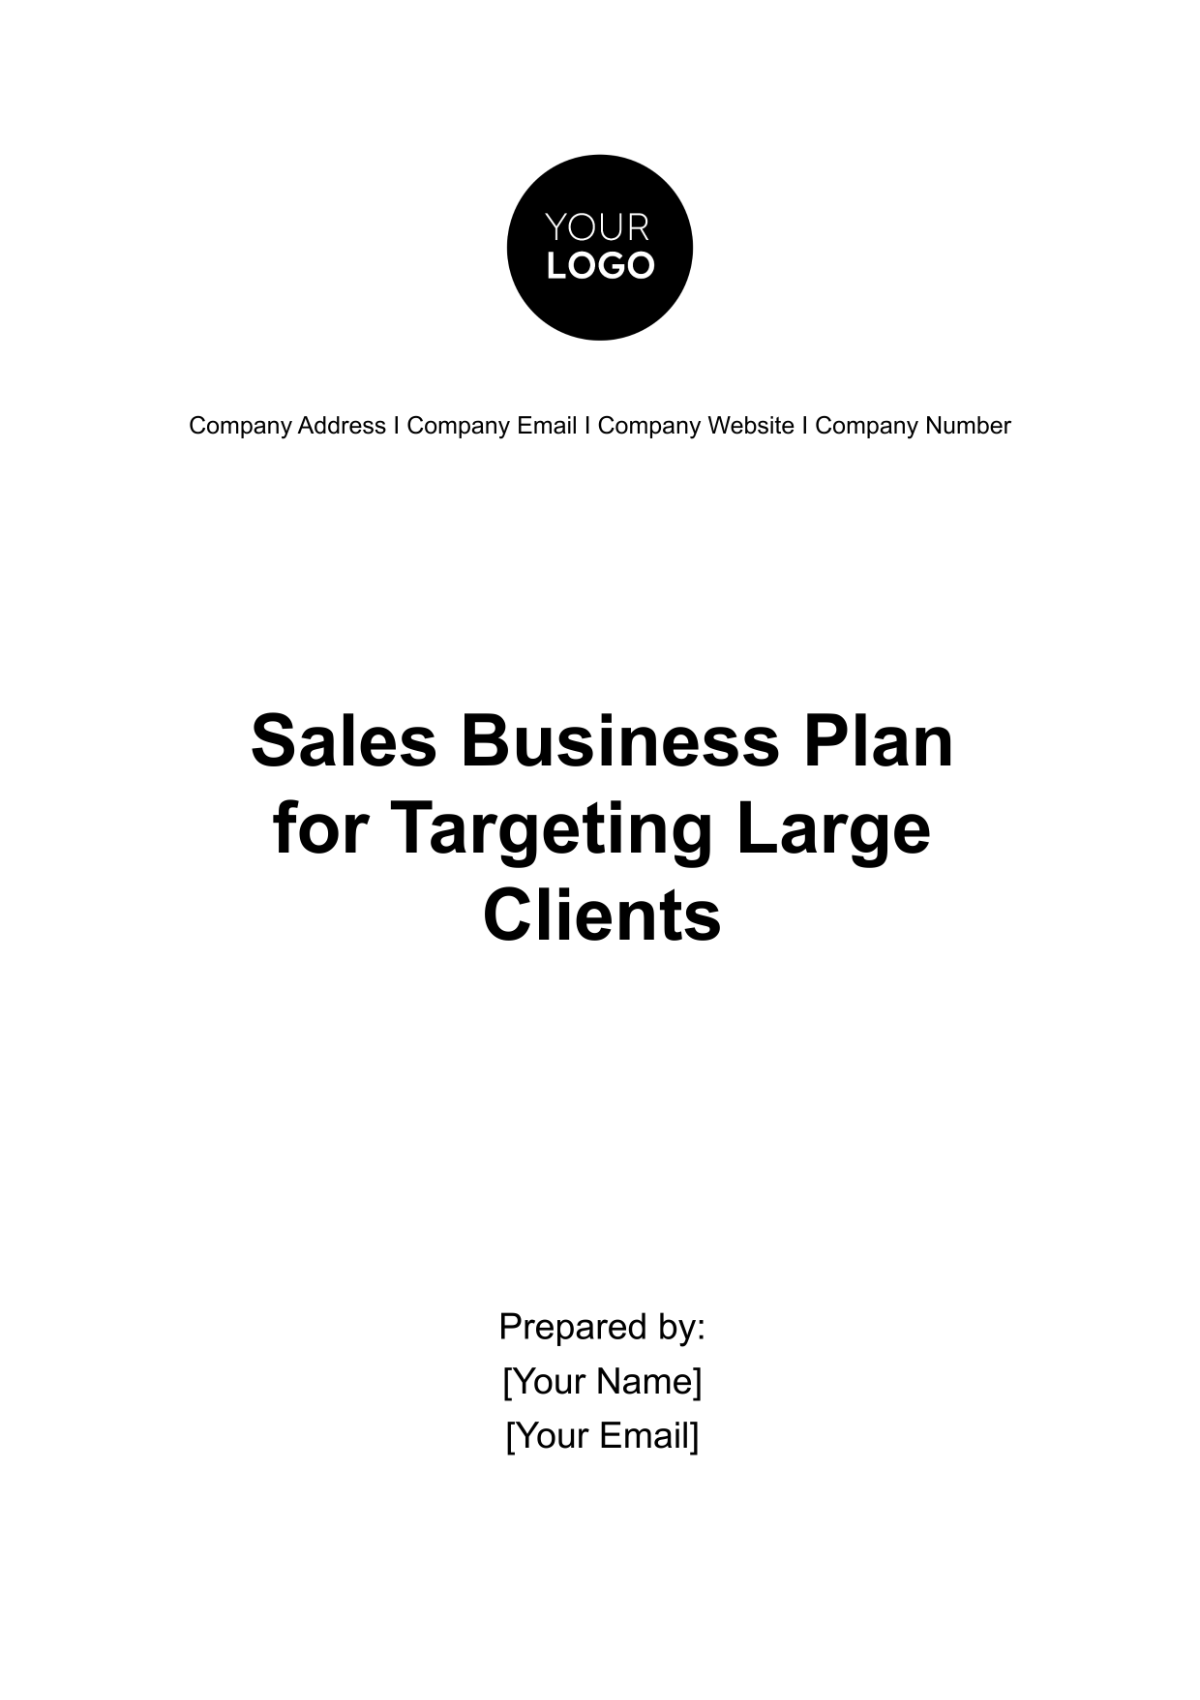 Free Sales Business Plan for Targeting Large Clients Template